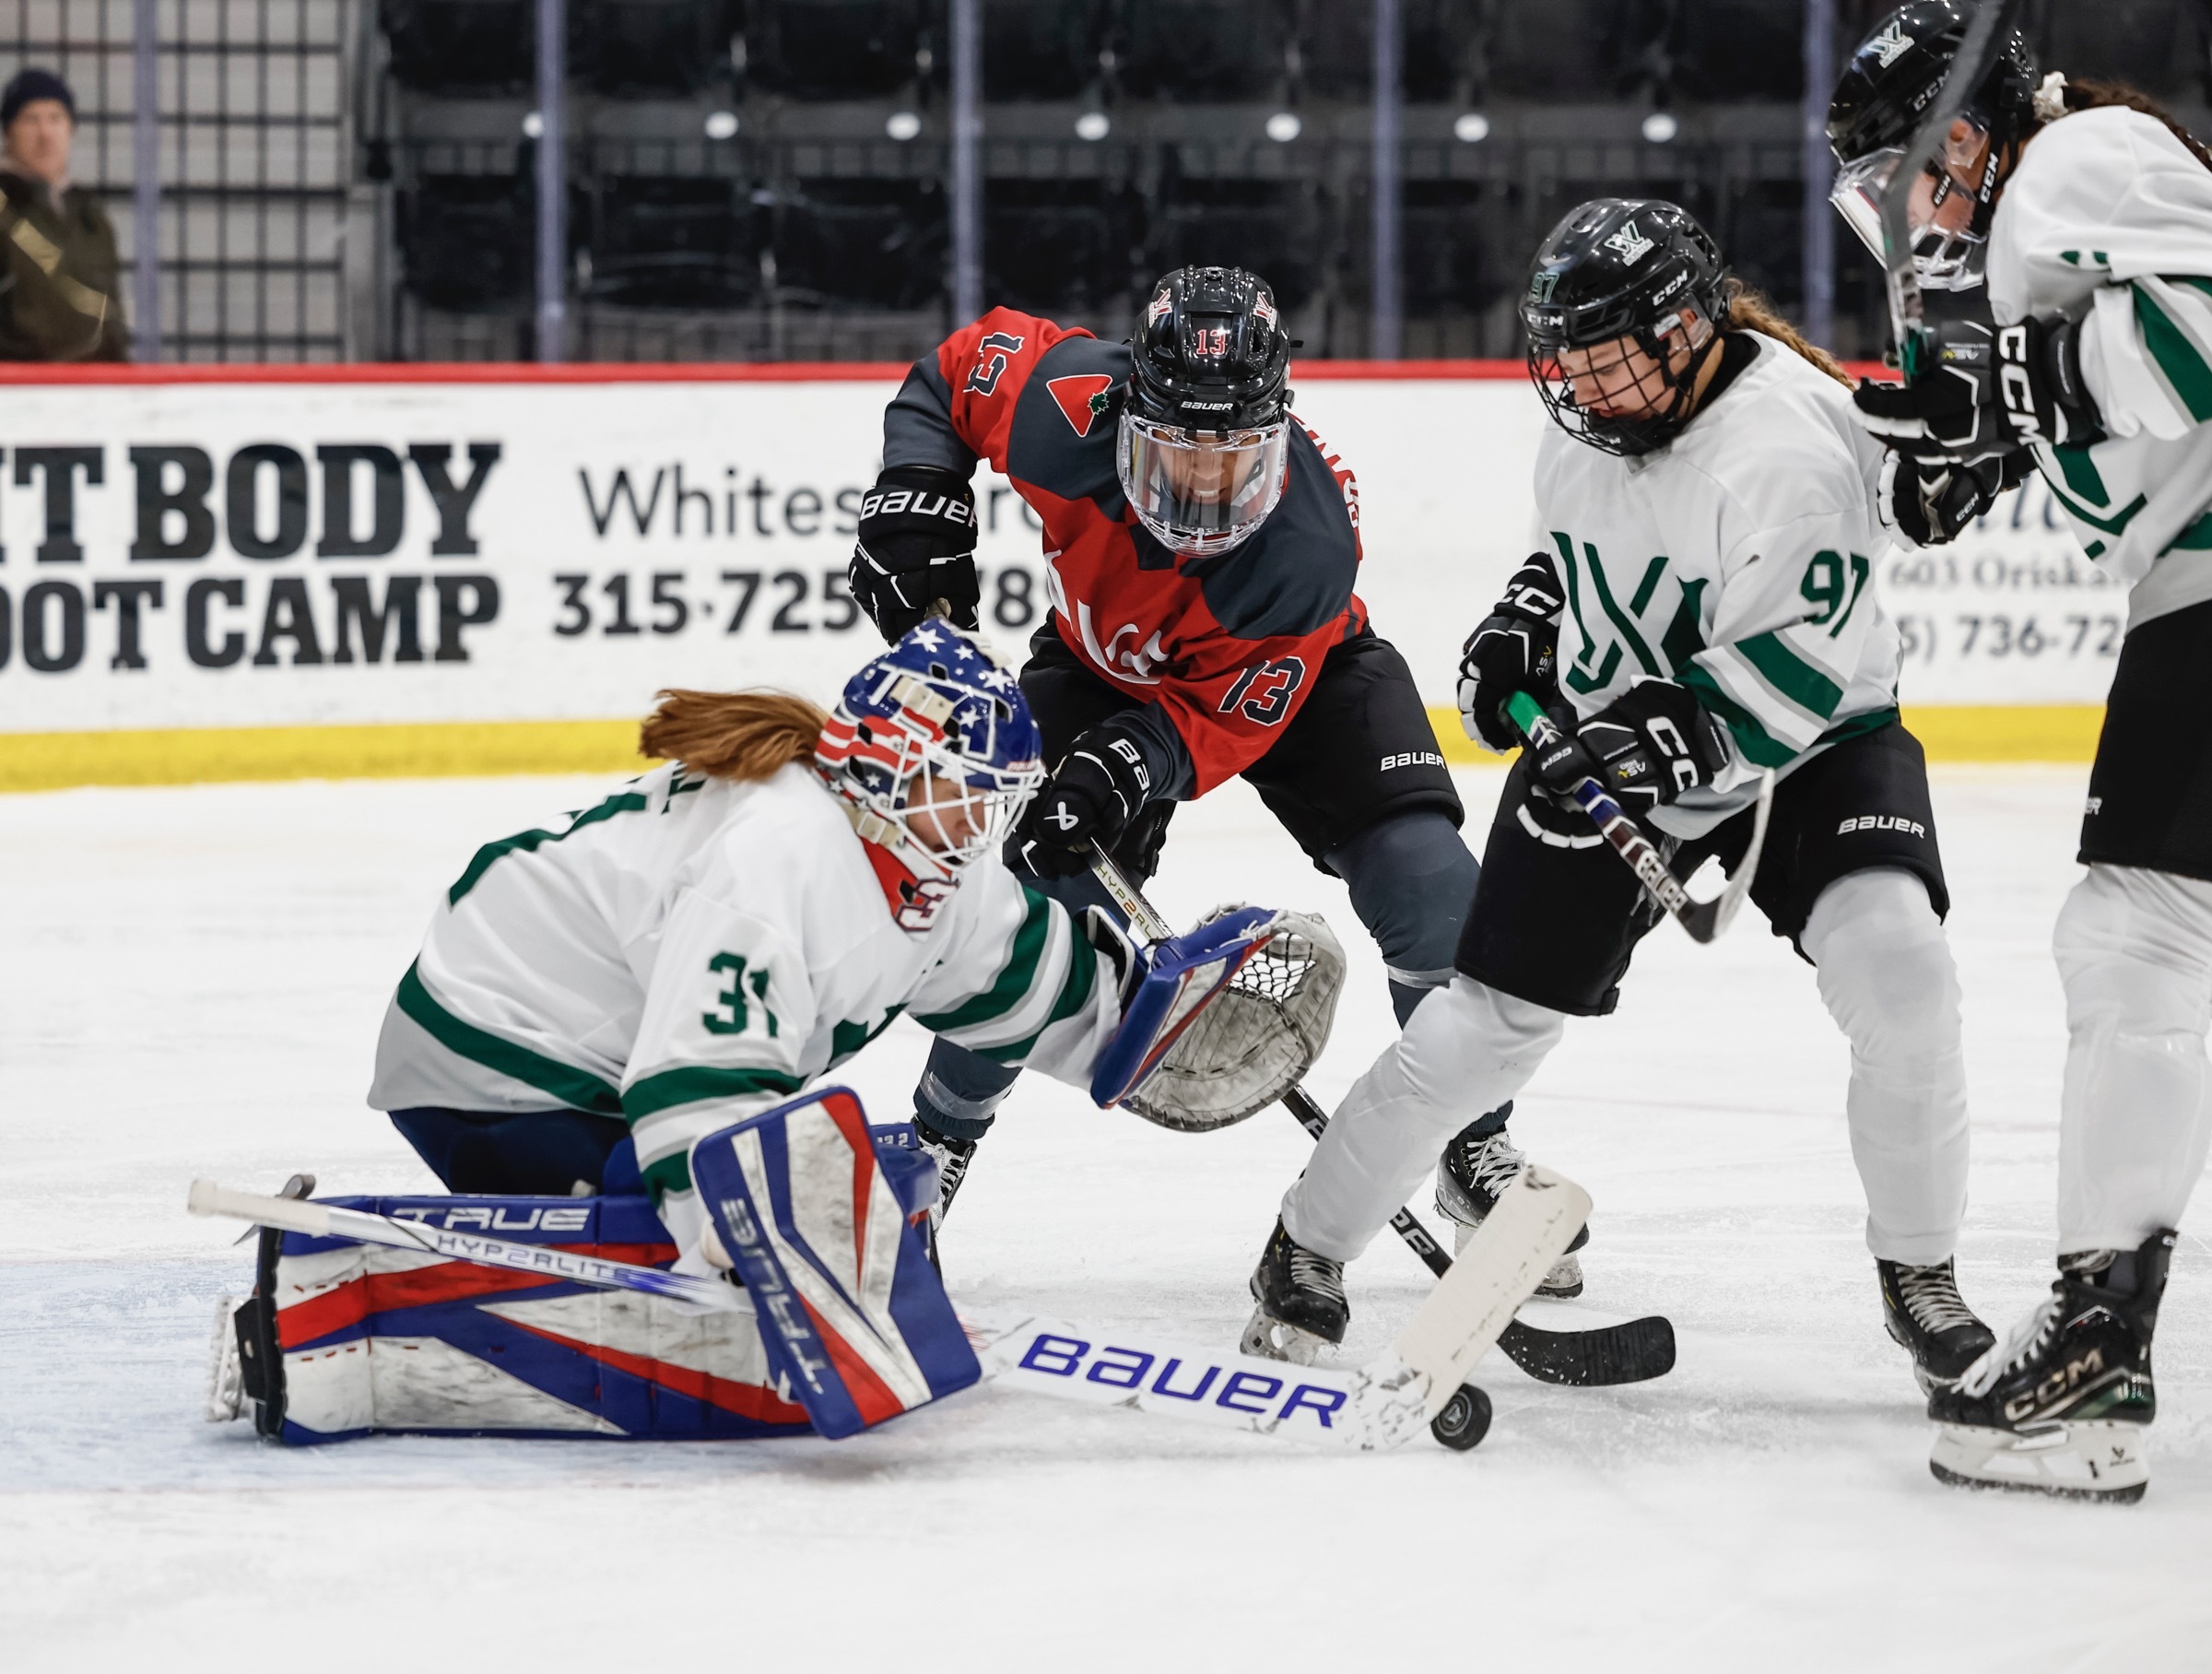 PWHL Playoffs Set for May: Top 4 Teams in Best-of-Five Series